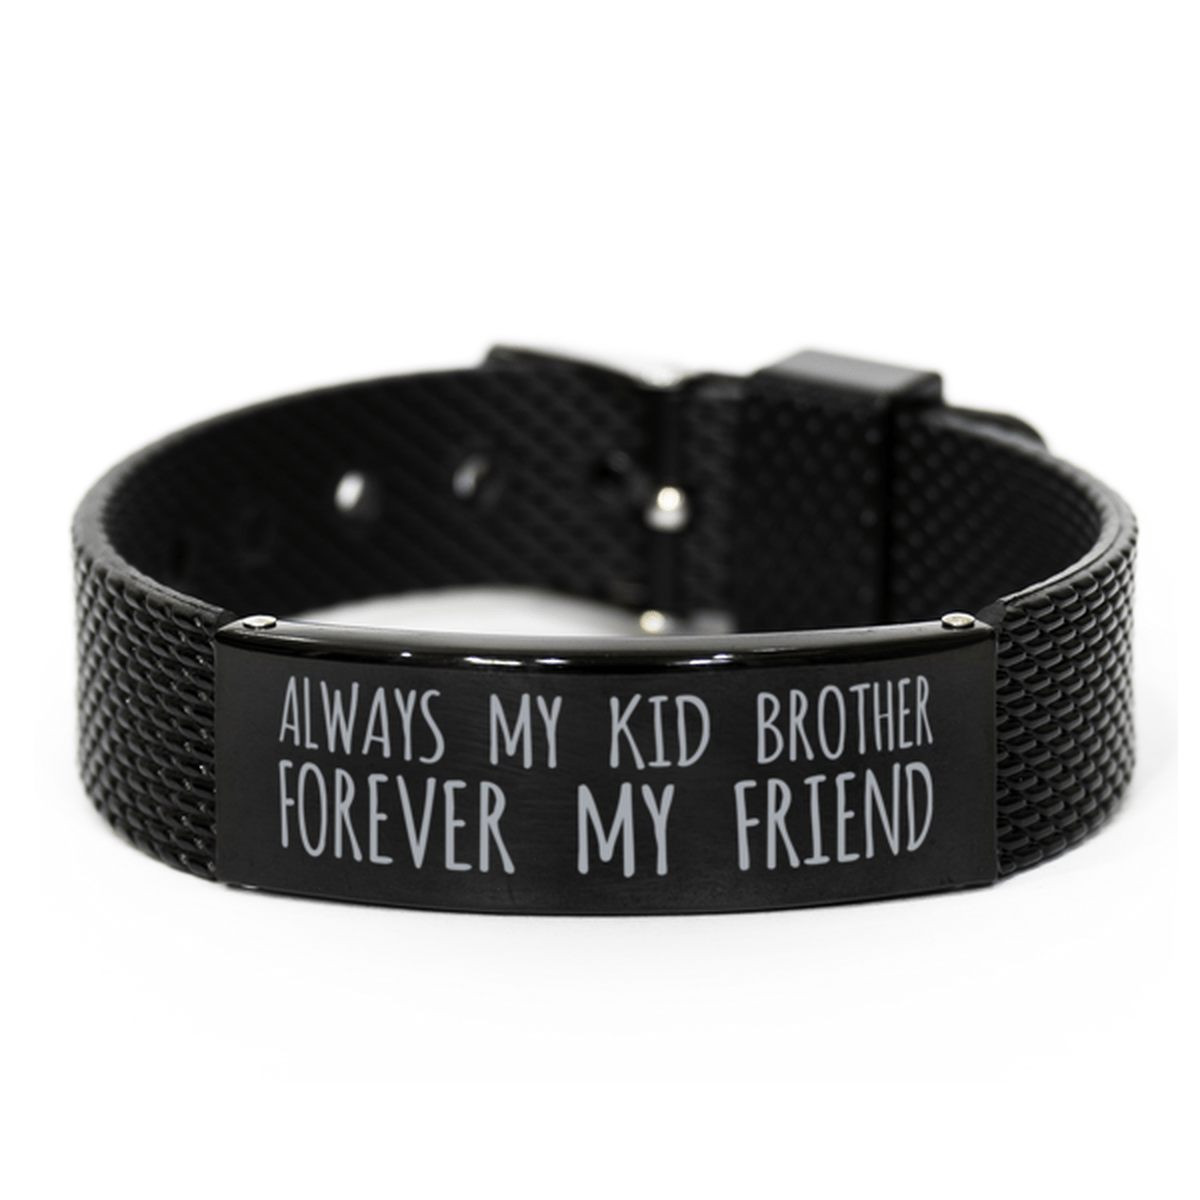 Inspirational Kid Brother Black Shark Mesh Bracelet, Always My Kid Brother Forever My Friend, Best Birthday Gifts for Family Friends